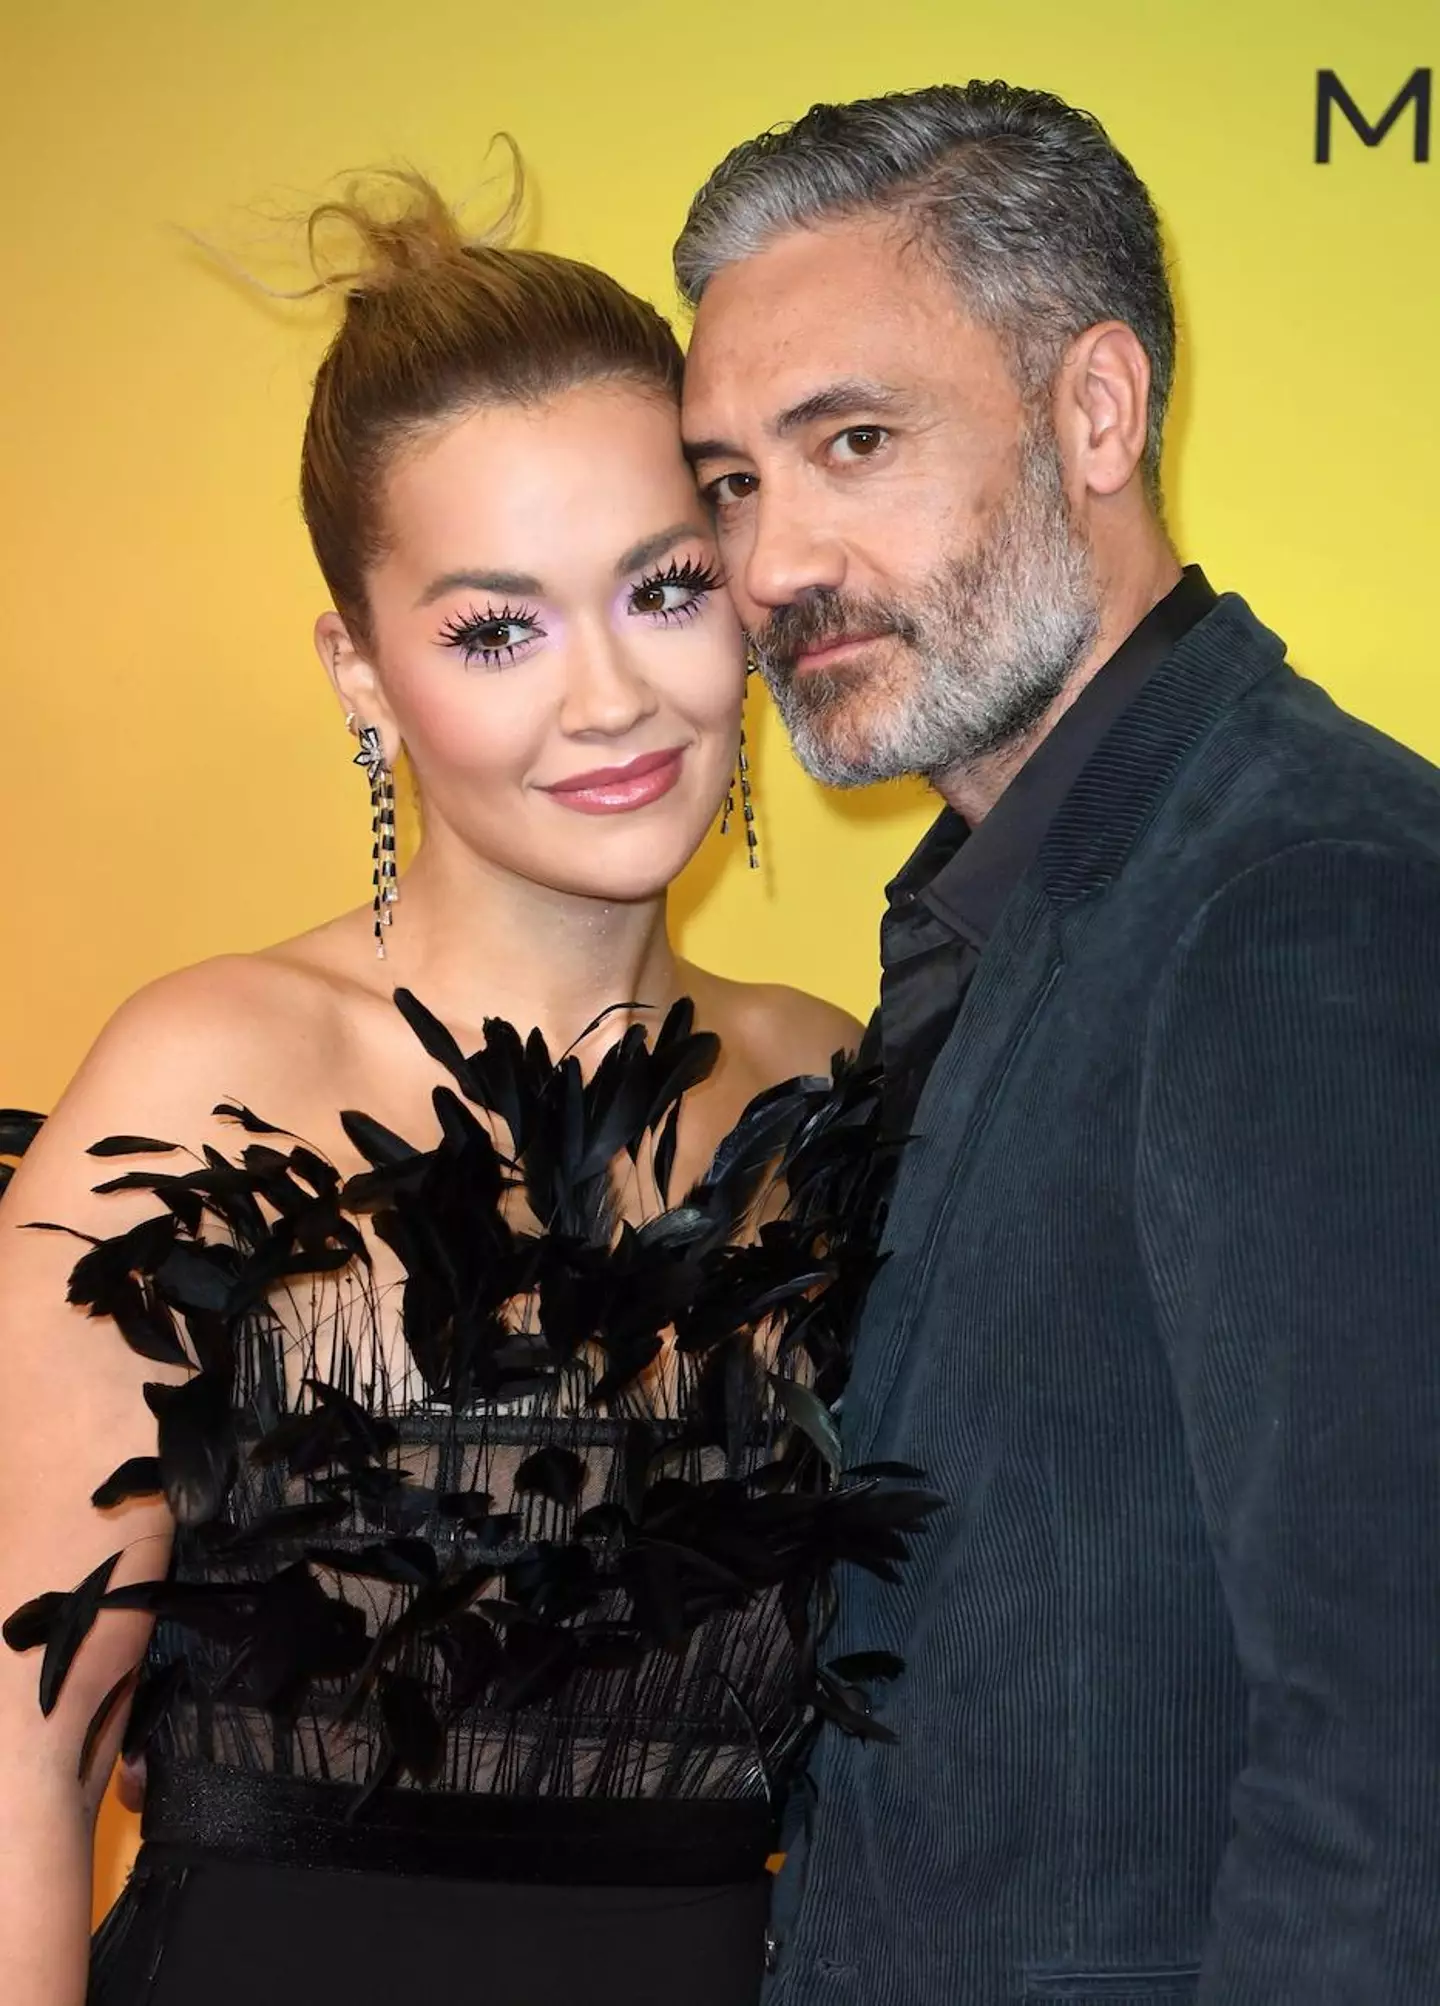 Taika Waititi and Rita Ora have publicly been together since 2021.